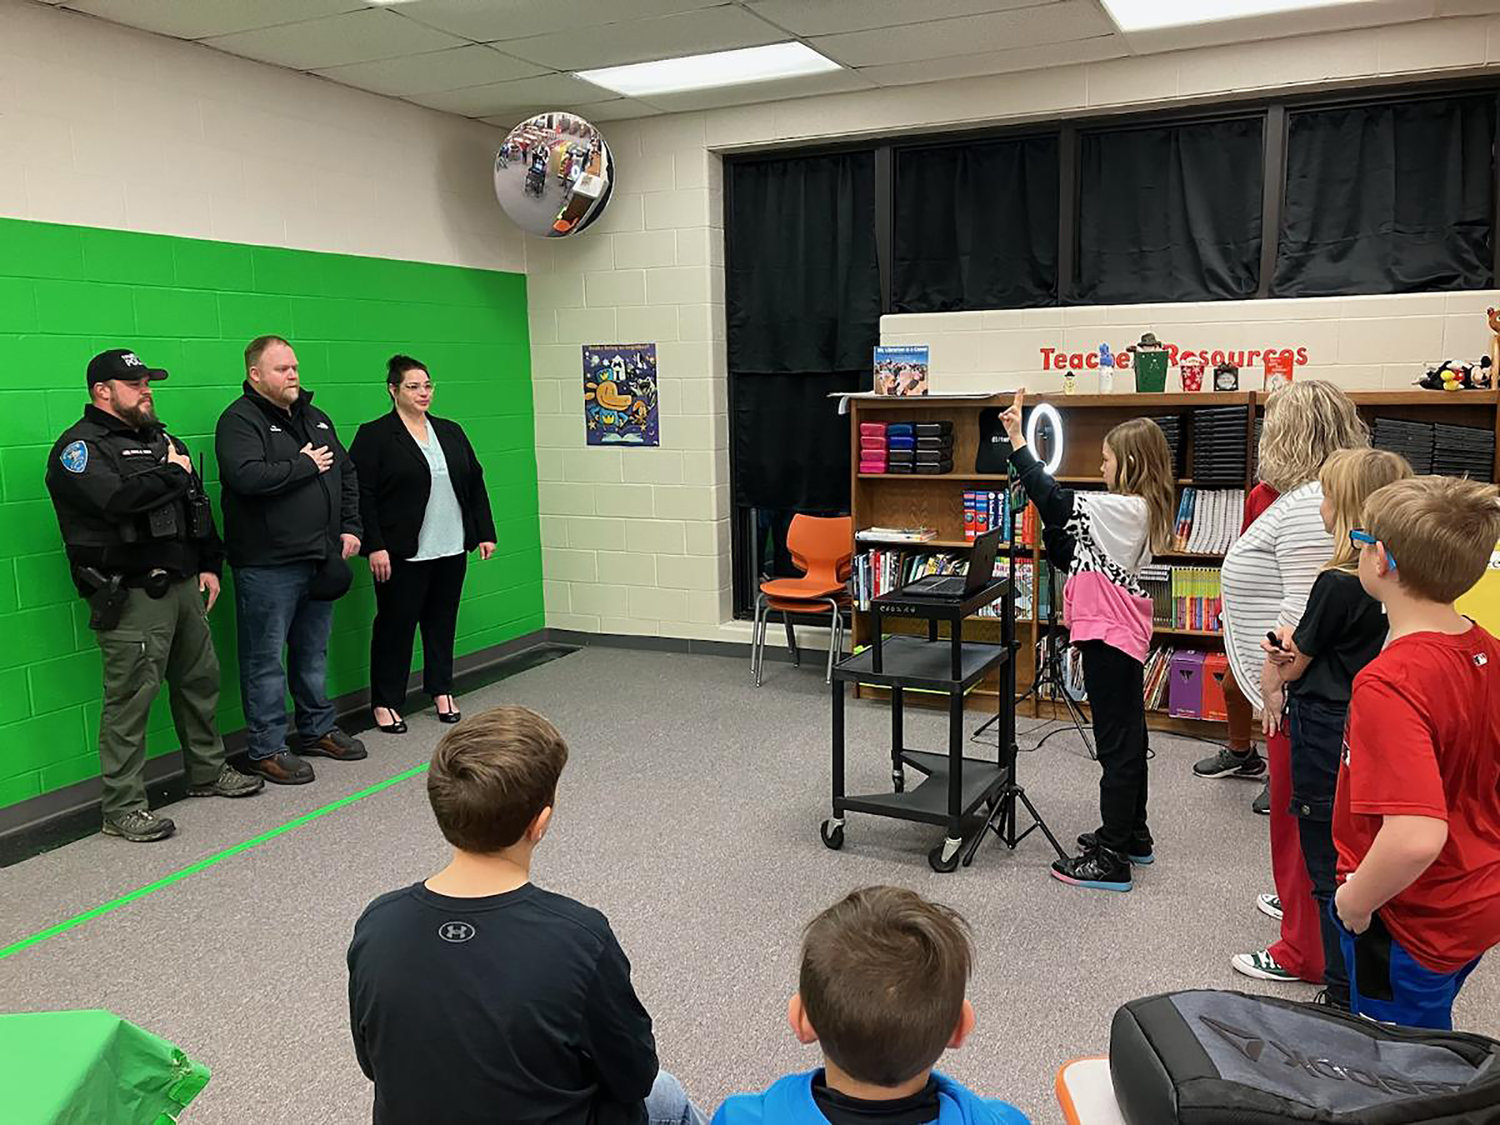 Truesdale Police Chief Casey Doyle, Mayor Chris Watson, and City Clerk Elsa Smith Smith-Fernandez prepare to lead students in the Pledge of Allegiance as part of Rebecca Boone Elementary's daily news videos produced by students.